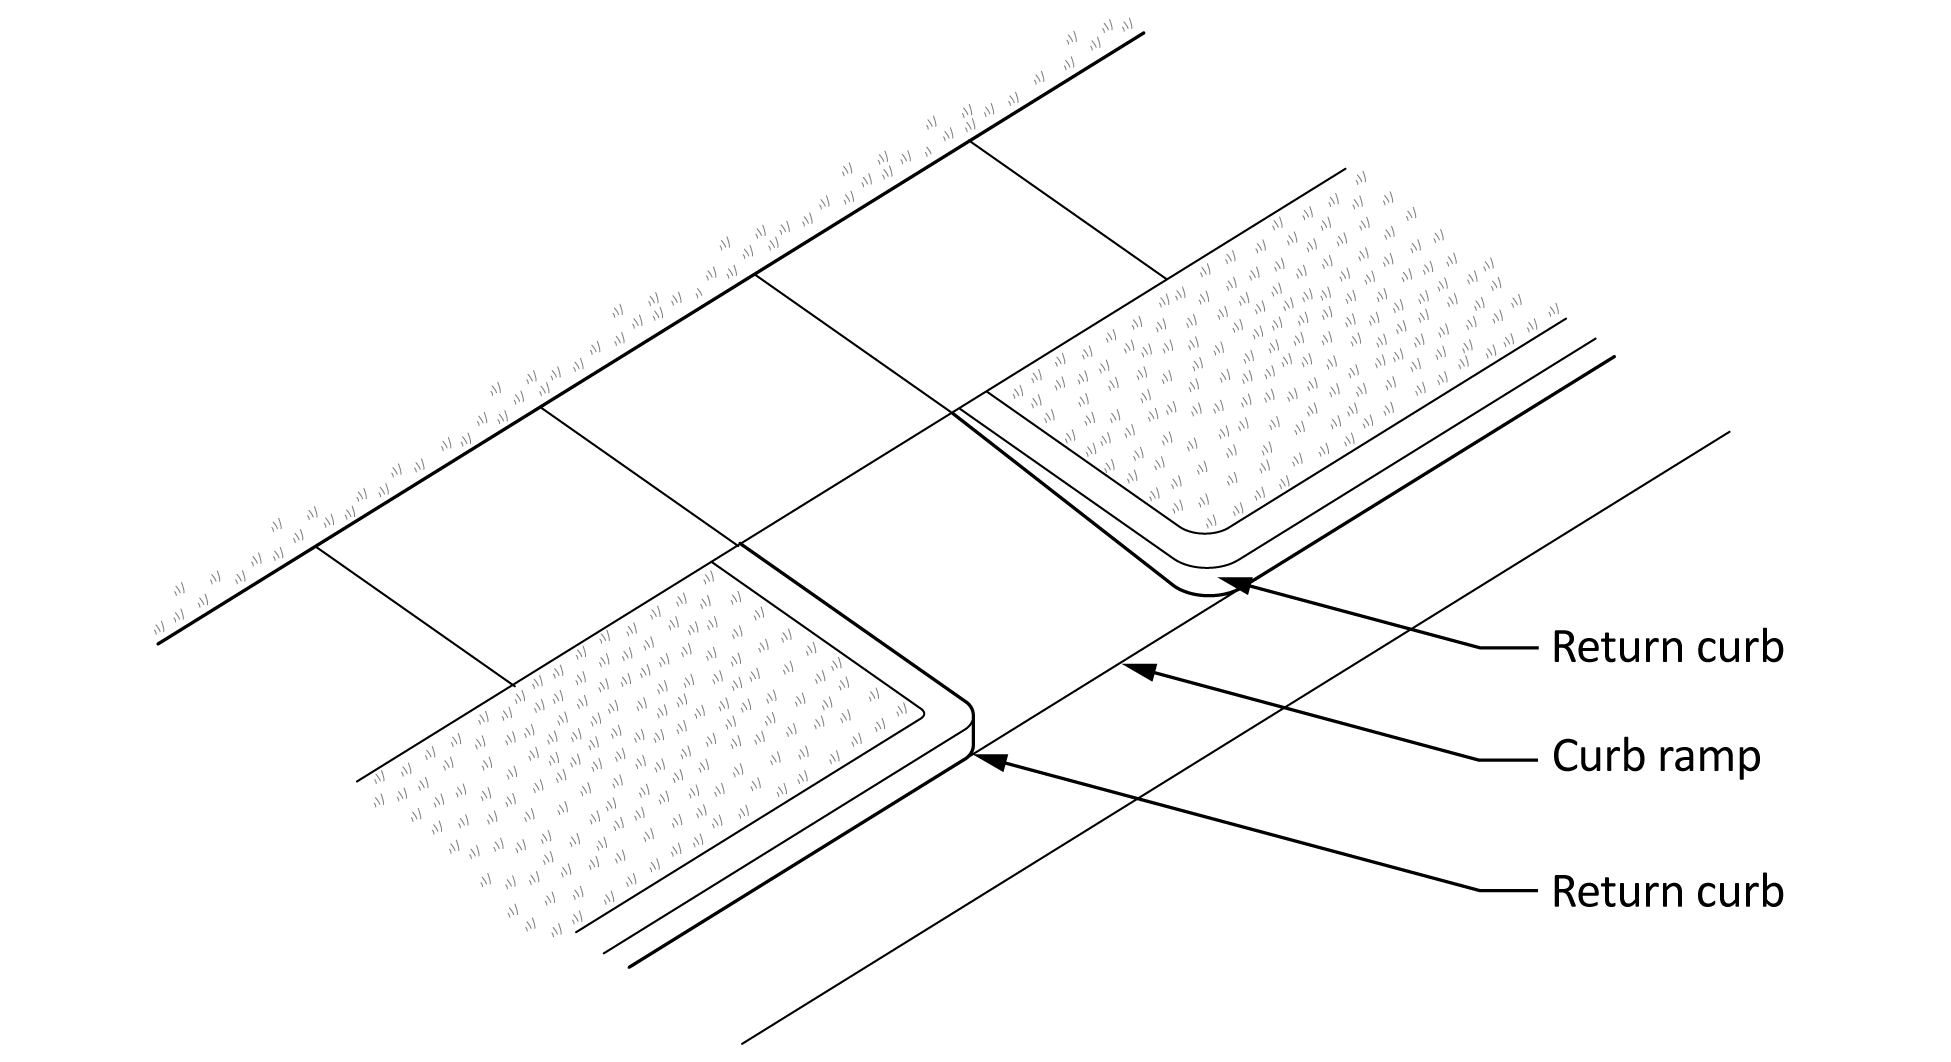 This figure shows a sidewalk as seen from above, with a curb ramp sloping down to the street and return curbs and grass on either side of the curb ramp. 